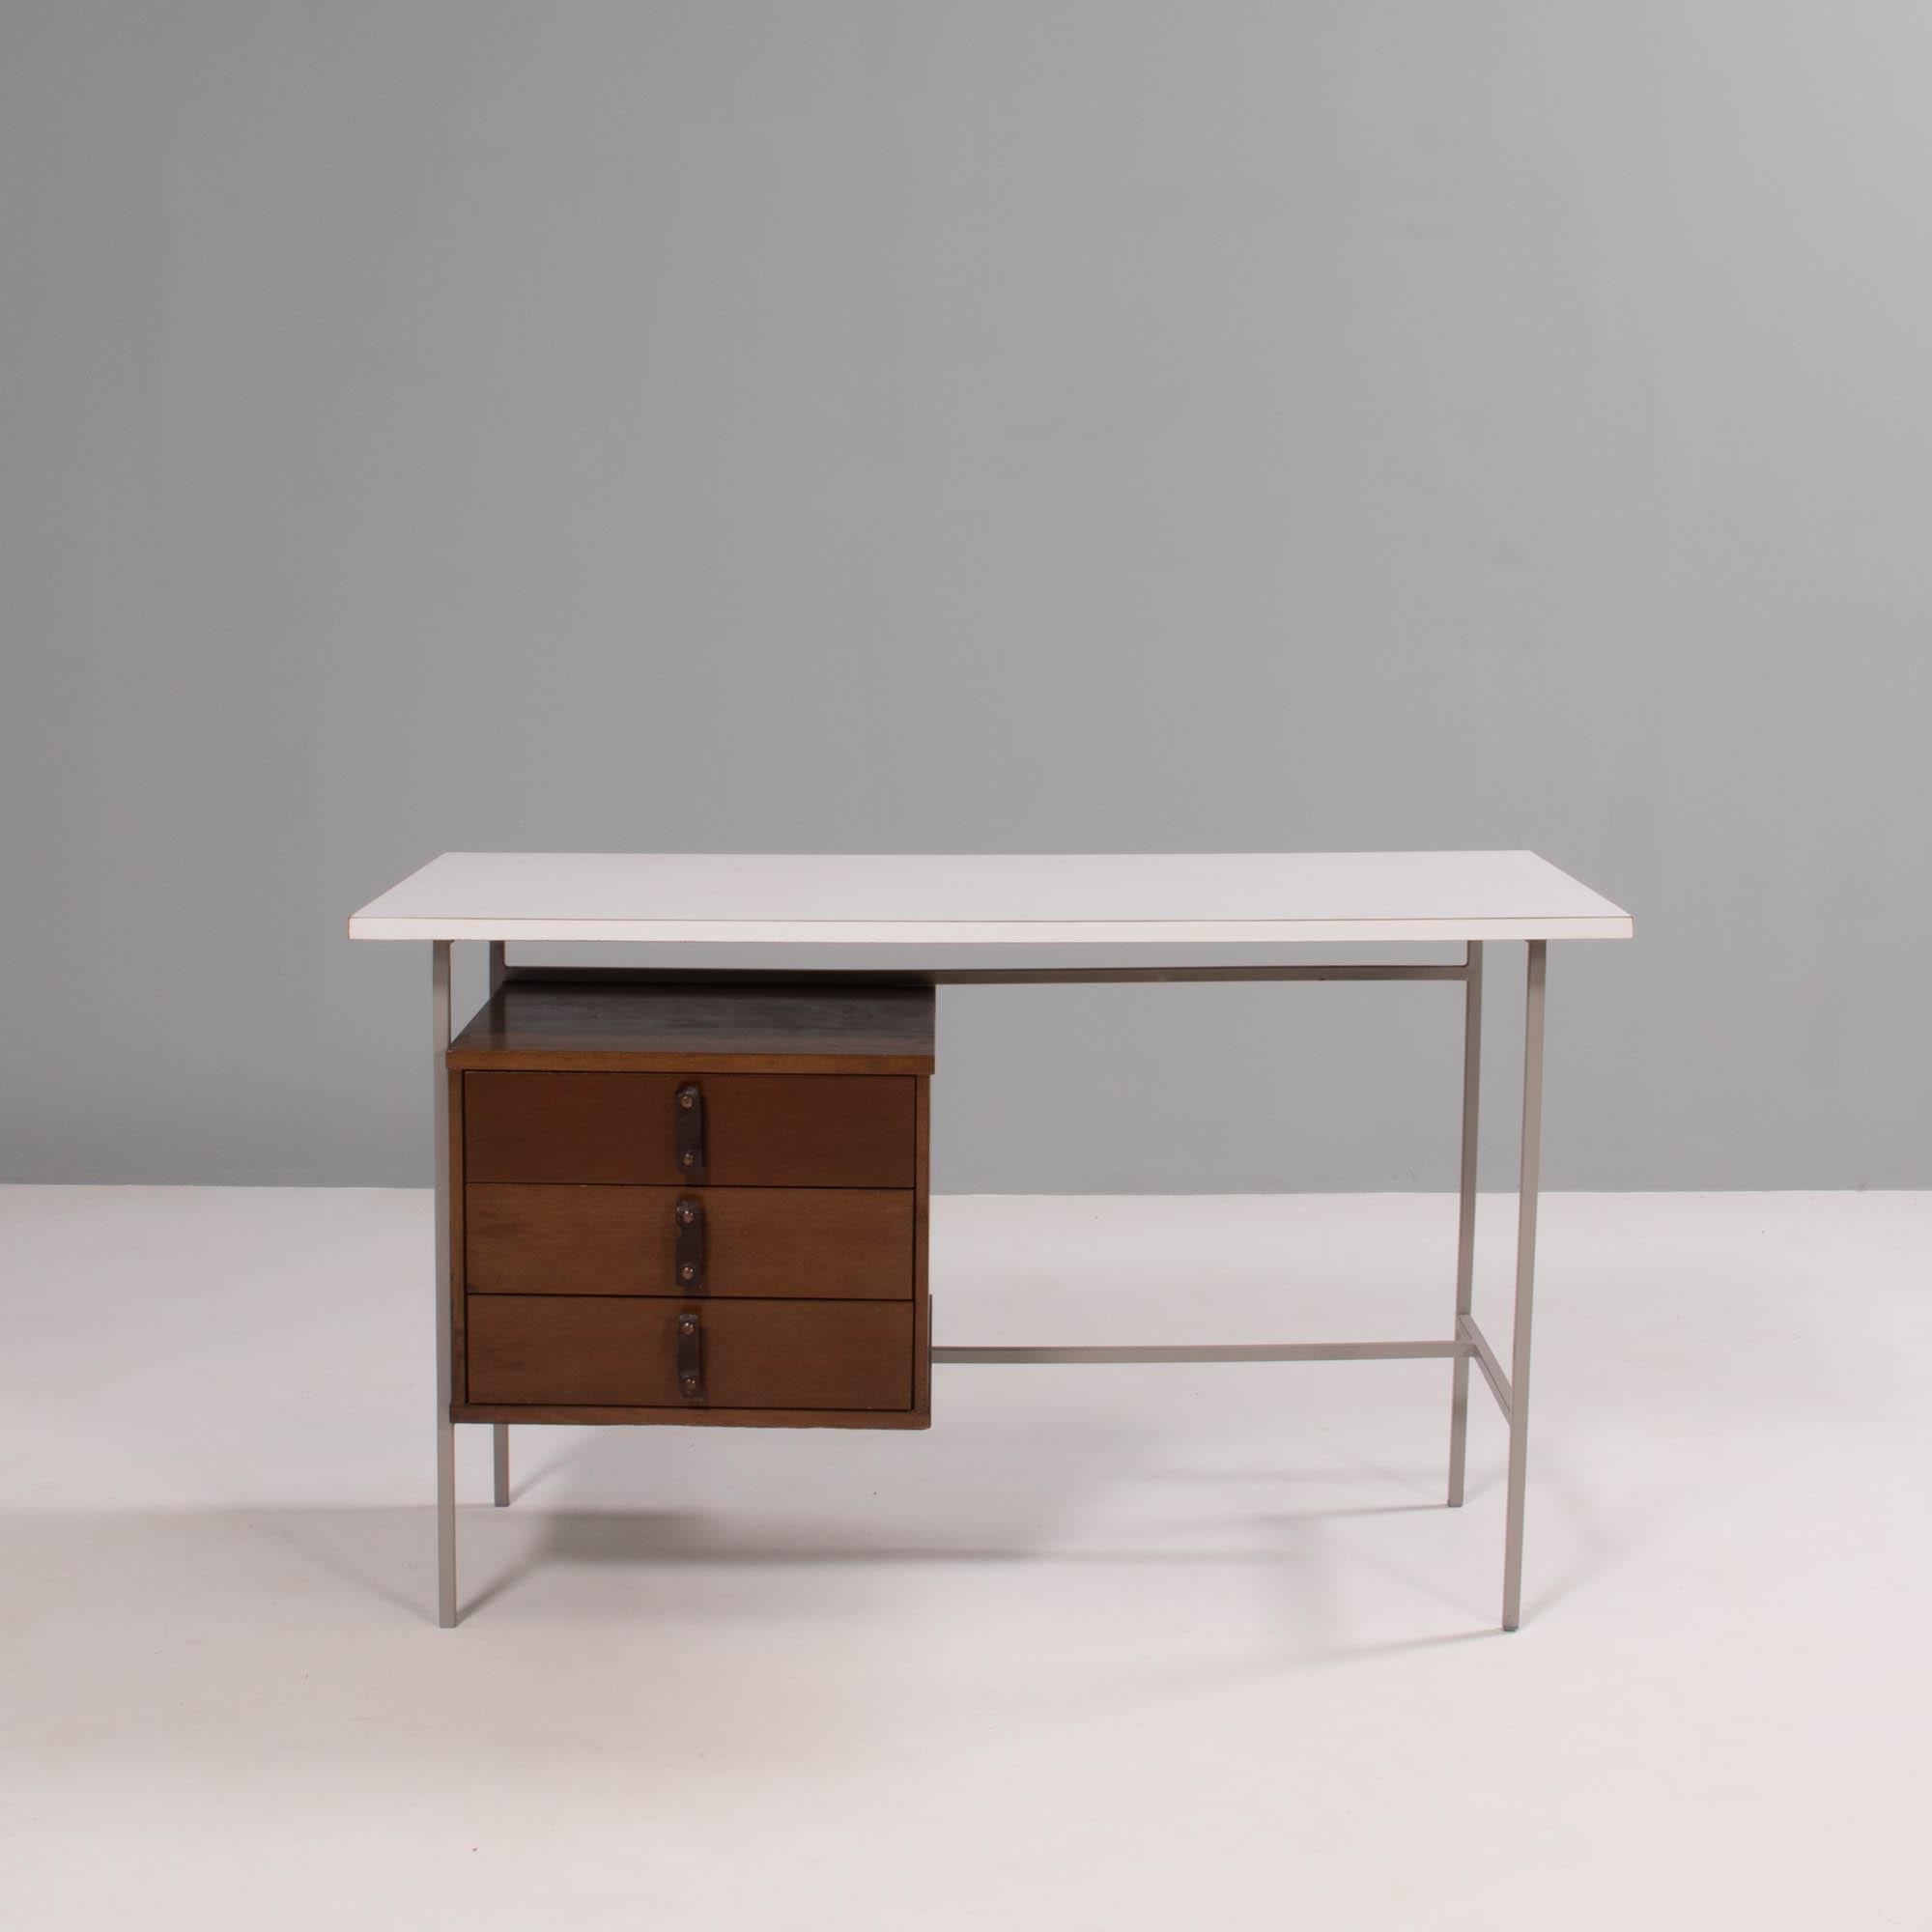 Designed and manufactured by Knoll & Drake, this 1950s desk is both practical and timeless.

Constructed with metal legs, the desk has a white Formica table top and single walnut wood pedestal.

Three drawers offer plenty of storage and are